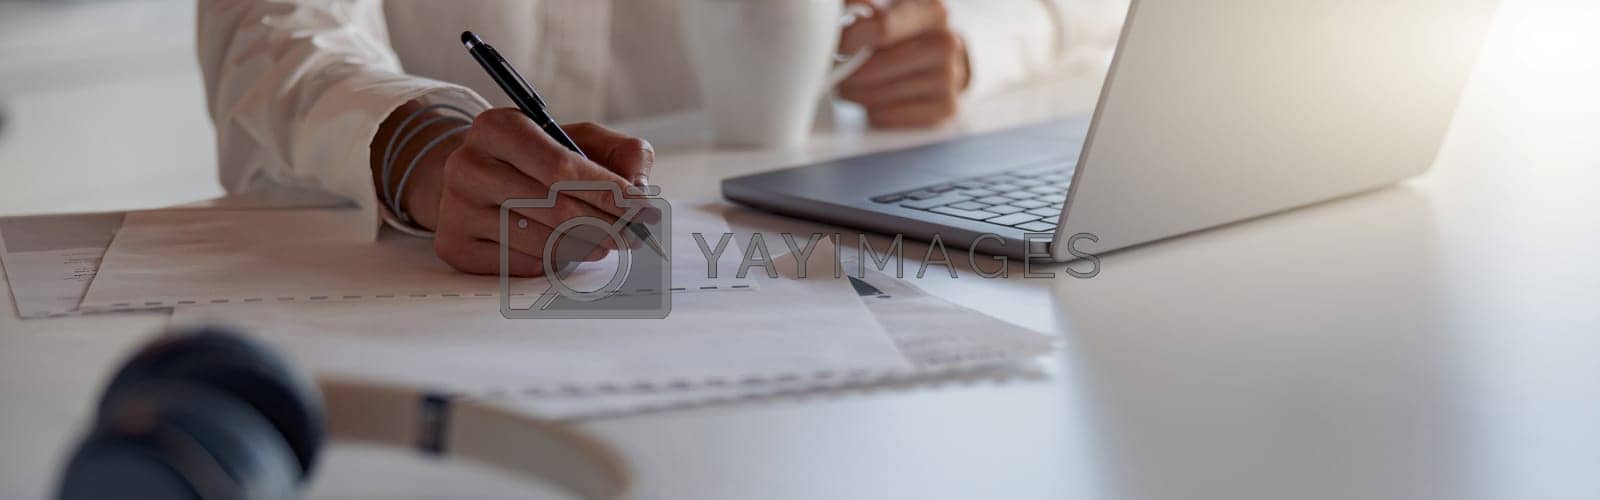 Royalty free image of Close up of business woman working laptop and making notes while sitting in modern office by Yaroslav_astakhov